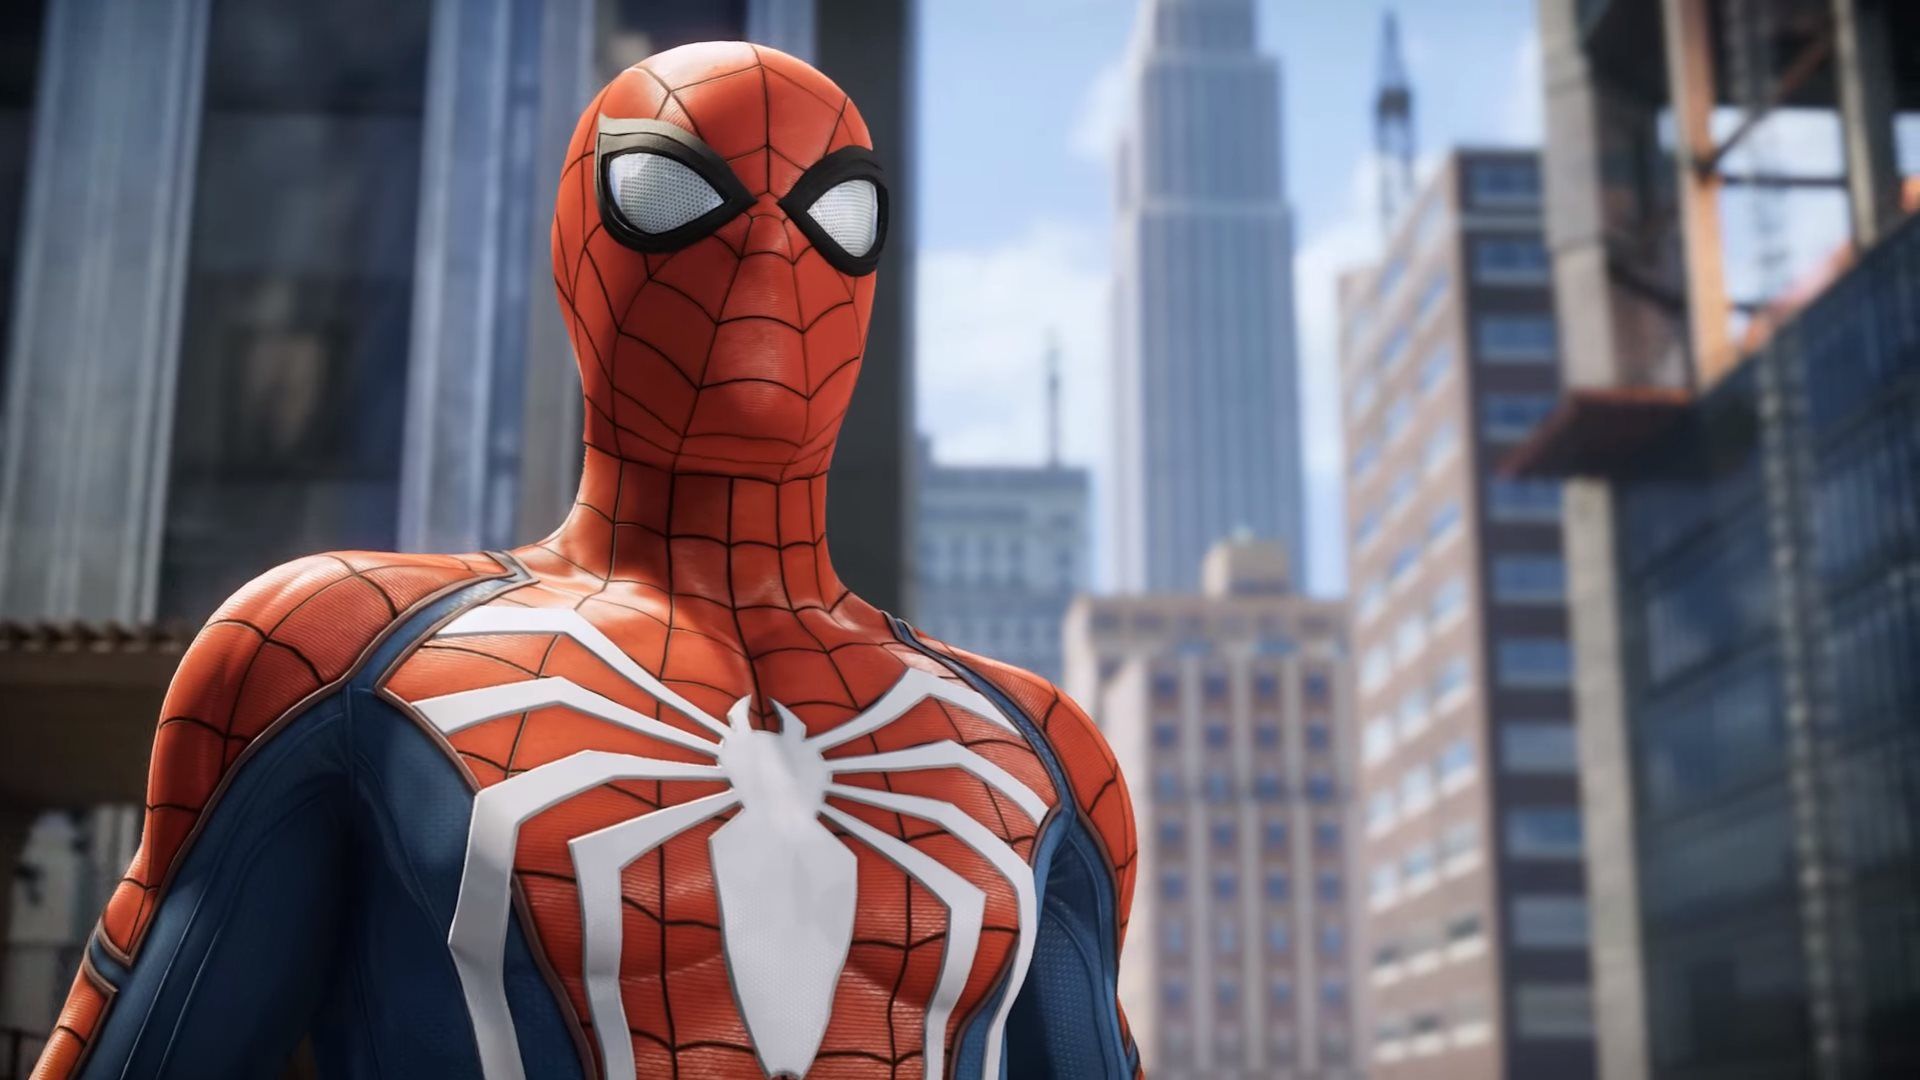 Spider-Man Teams With Kingpin in New PS4 Gameplay Trailer